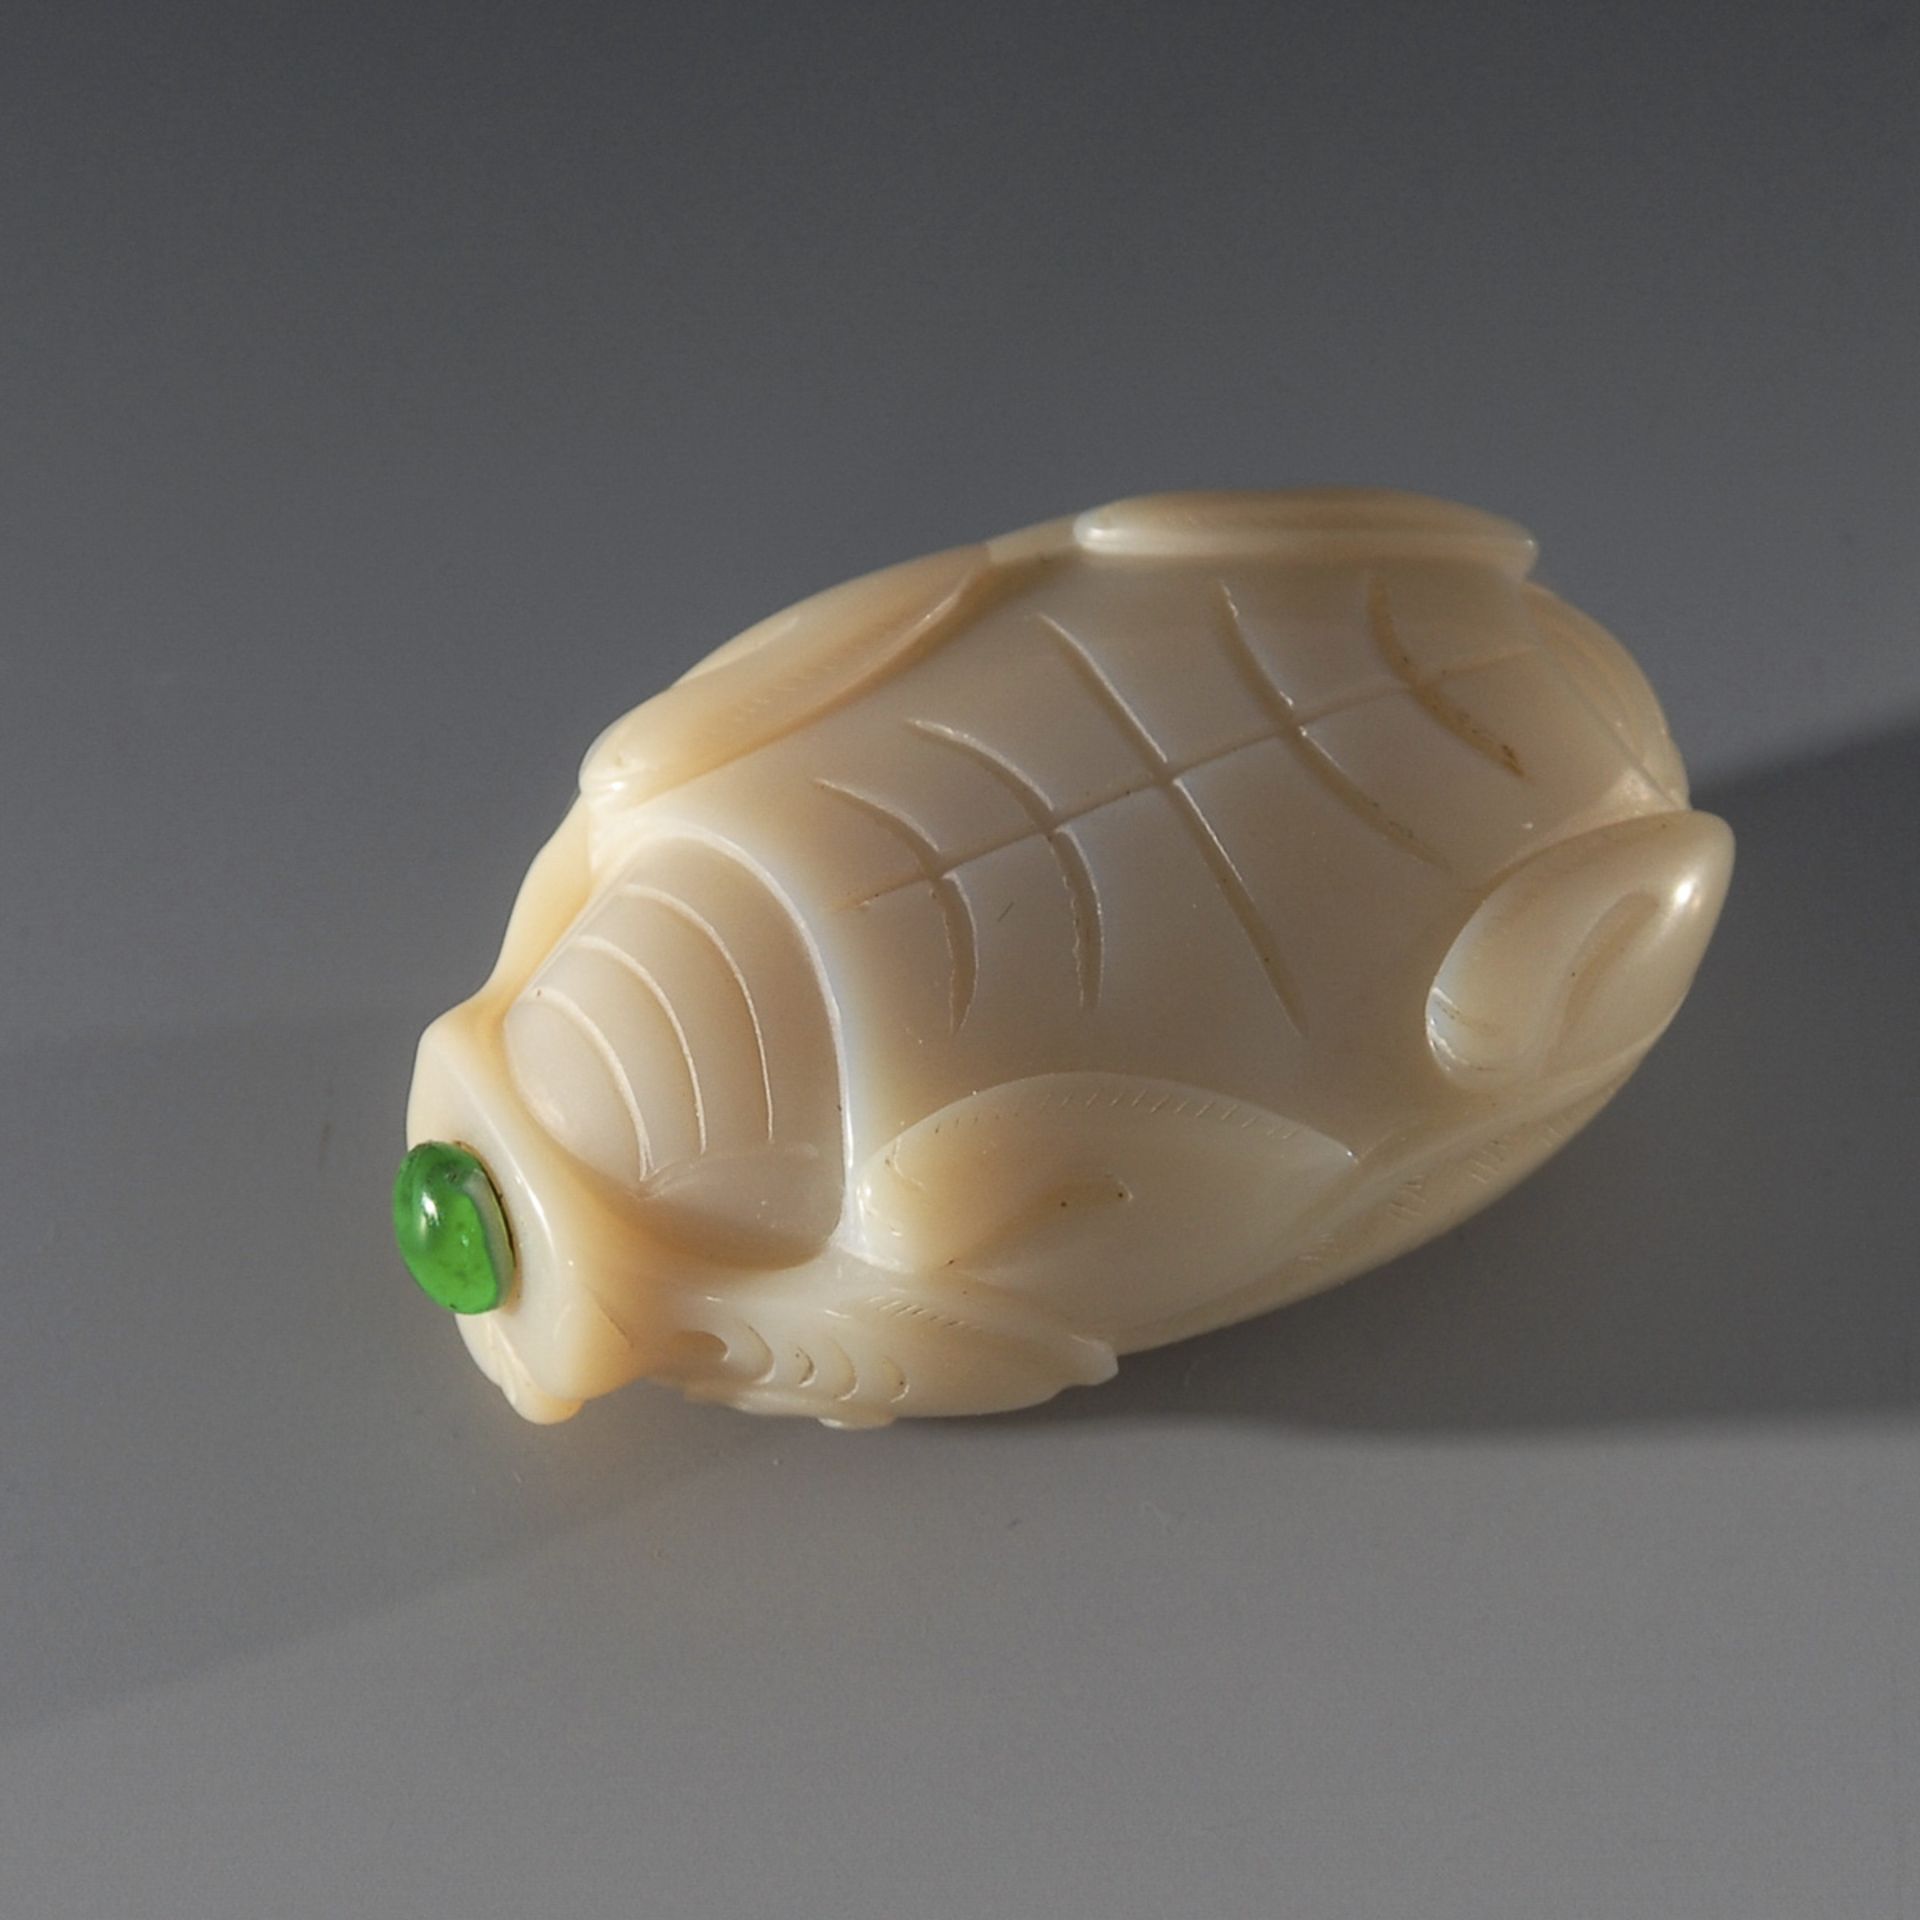 Snuffbottle - Schildkröte, weiße Jade.A Qing Dynasty White Jade Snuffbottle in the Shape of a - Image 3 of 4